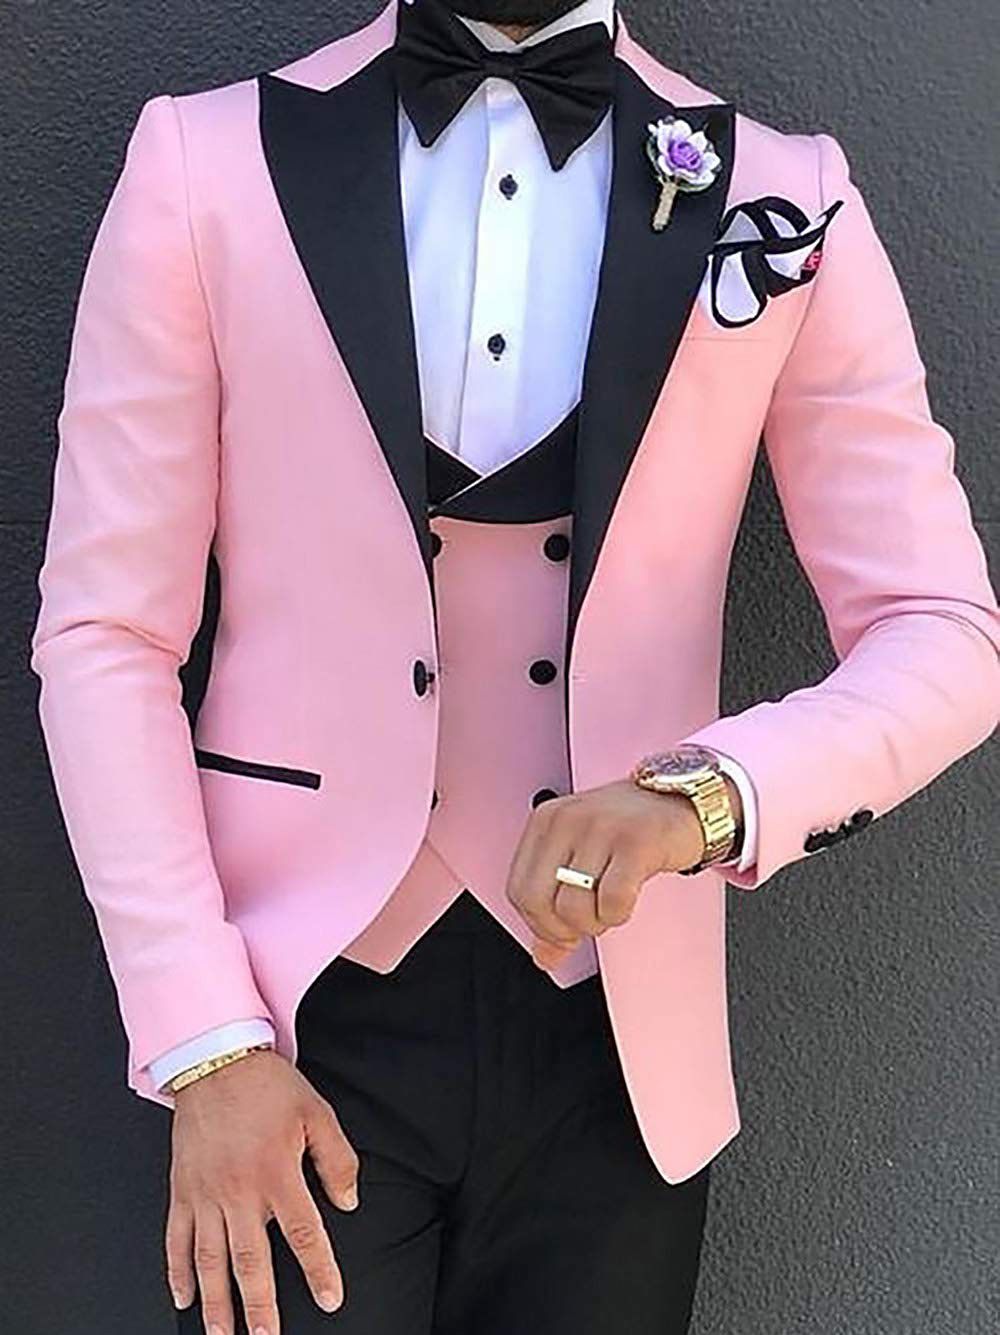 Men Suits 3 Piece Slim Fit Single Breasted Two Button Wedding Tuxedo Suit Blazer Waistcoat Trousers